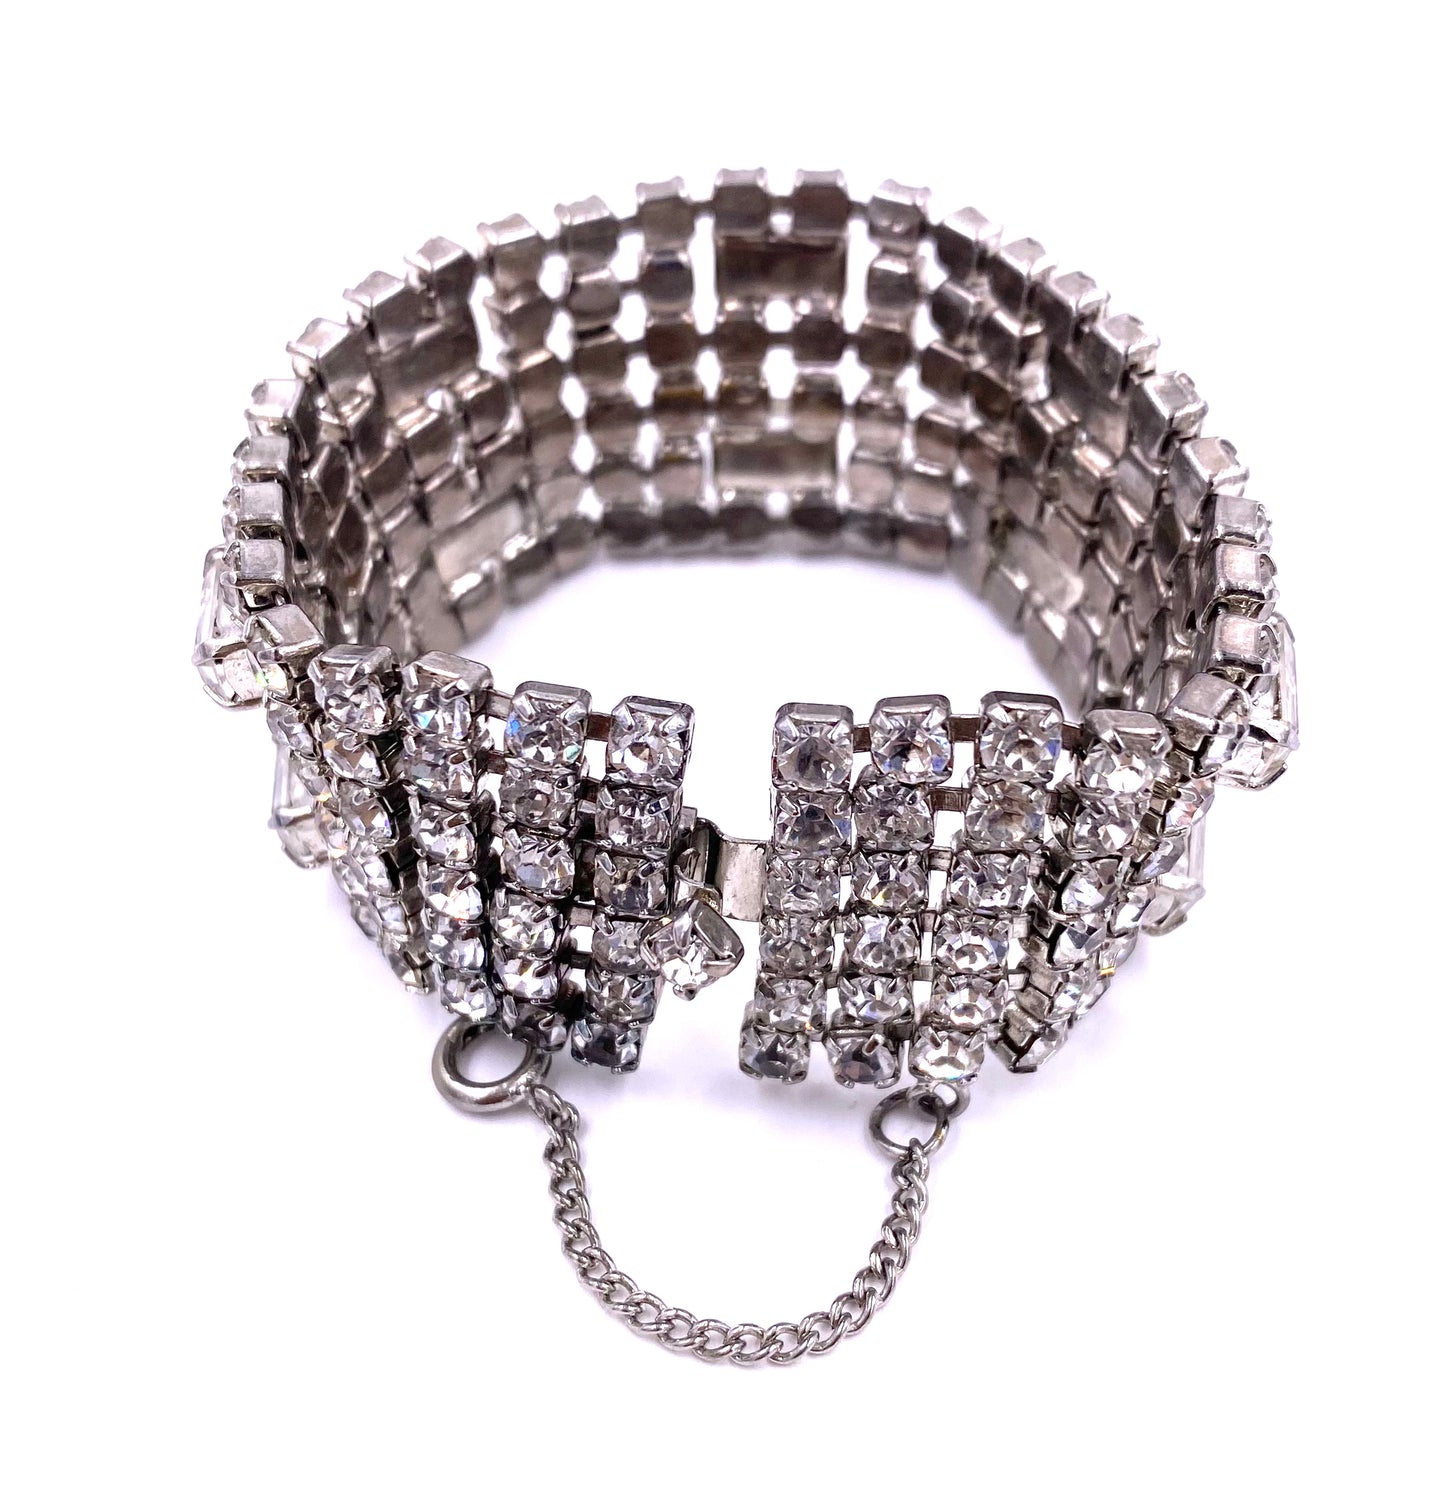 Weiss Large Rhinestone Bracelet with Chain